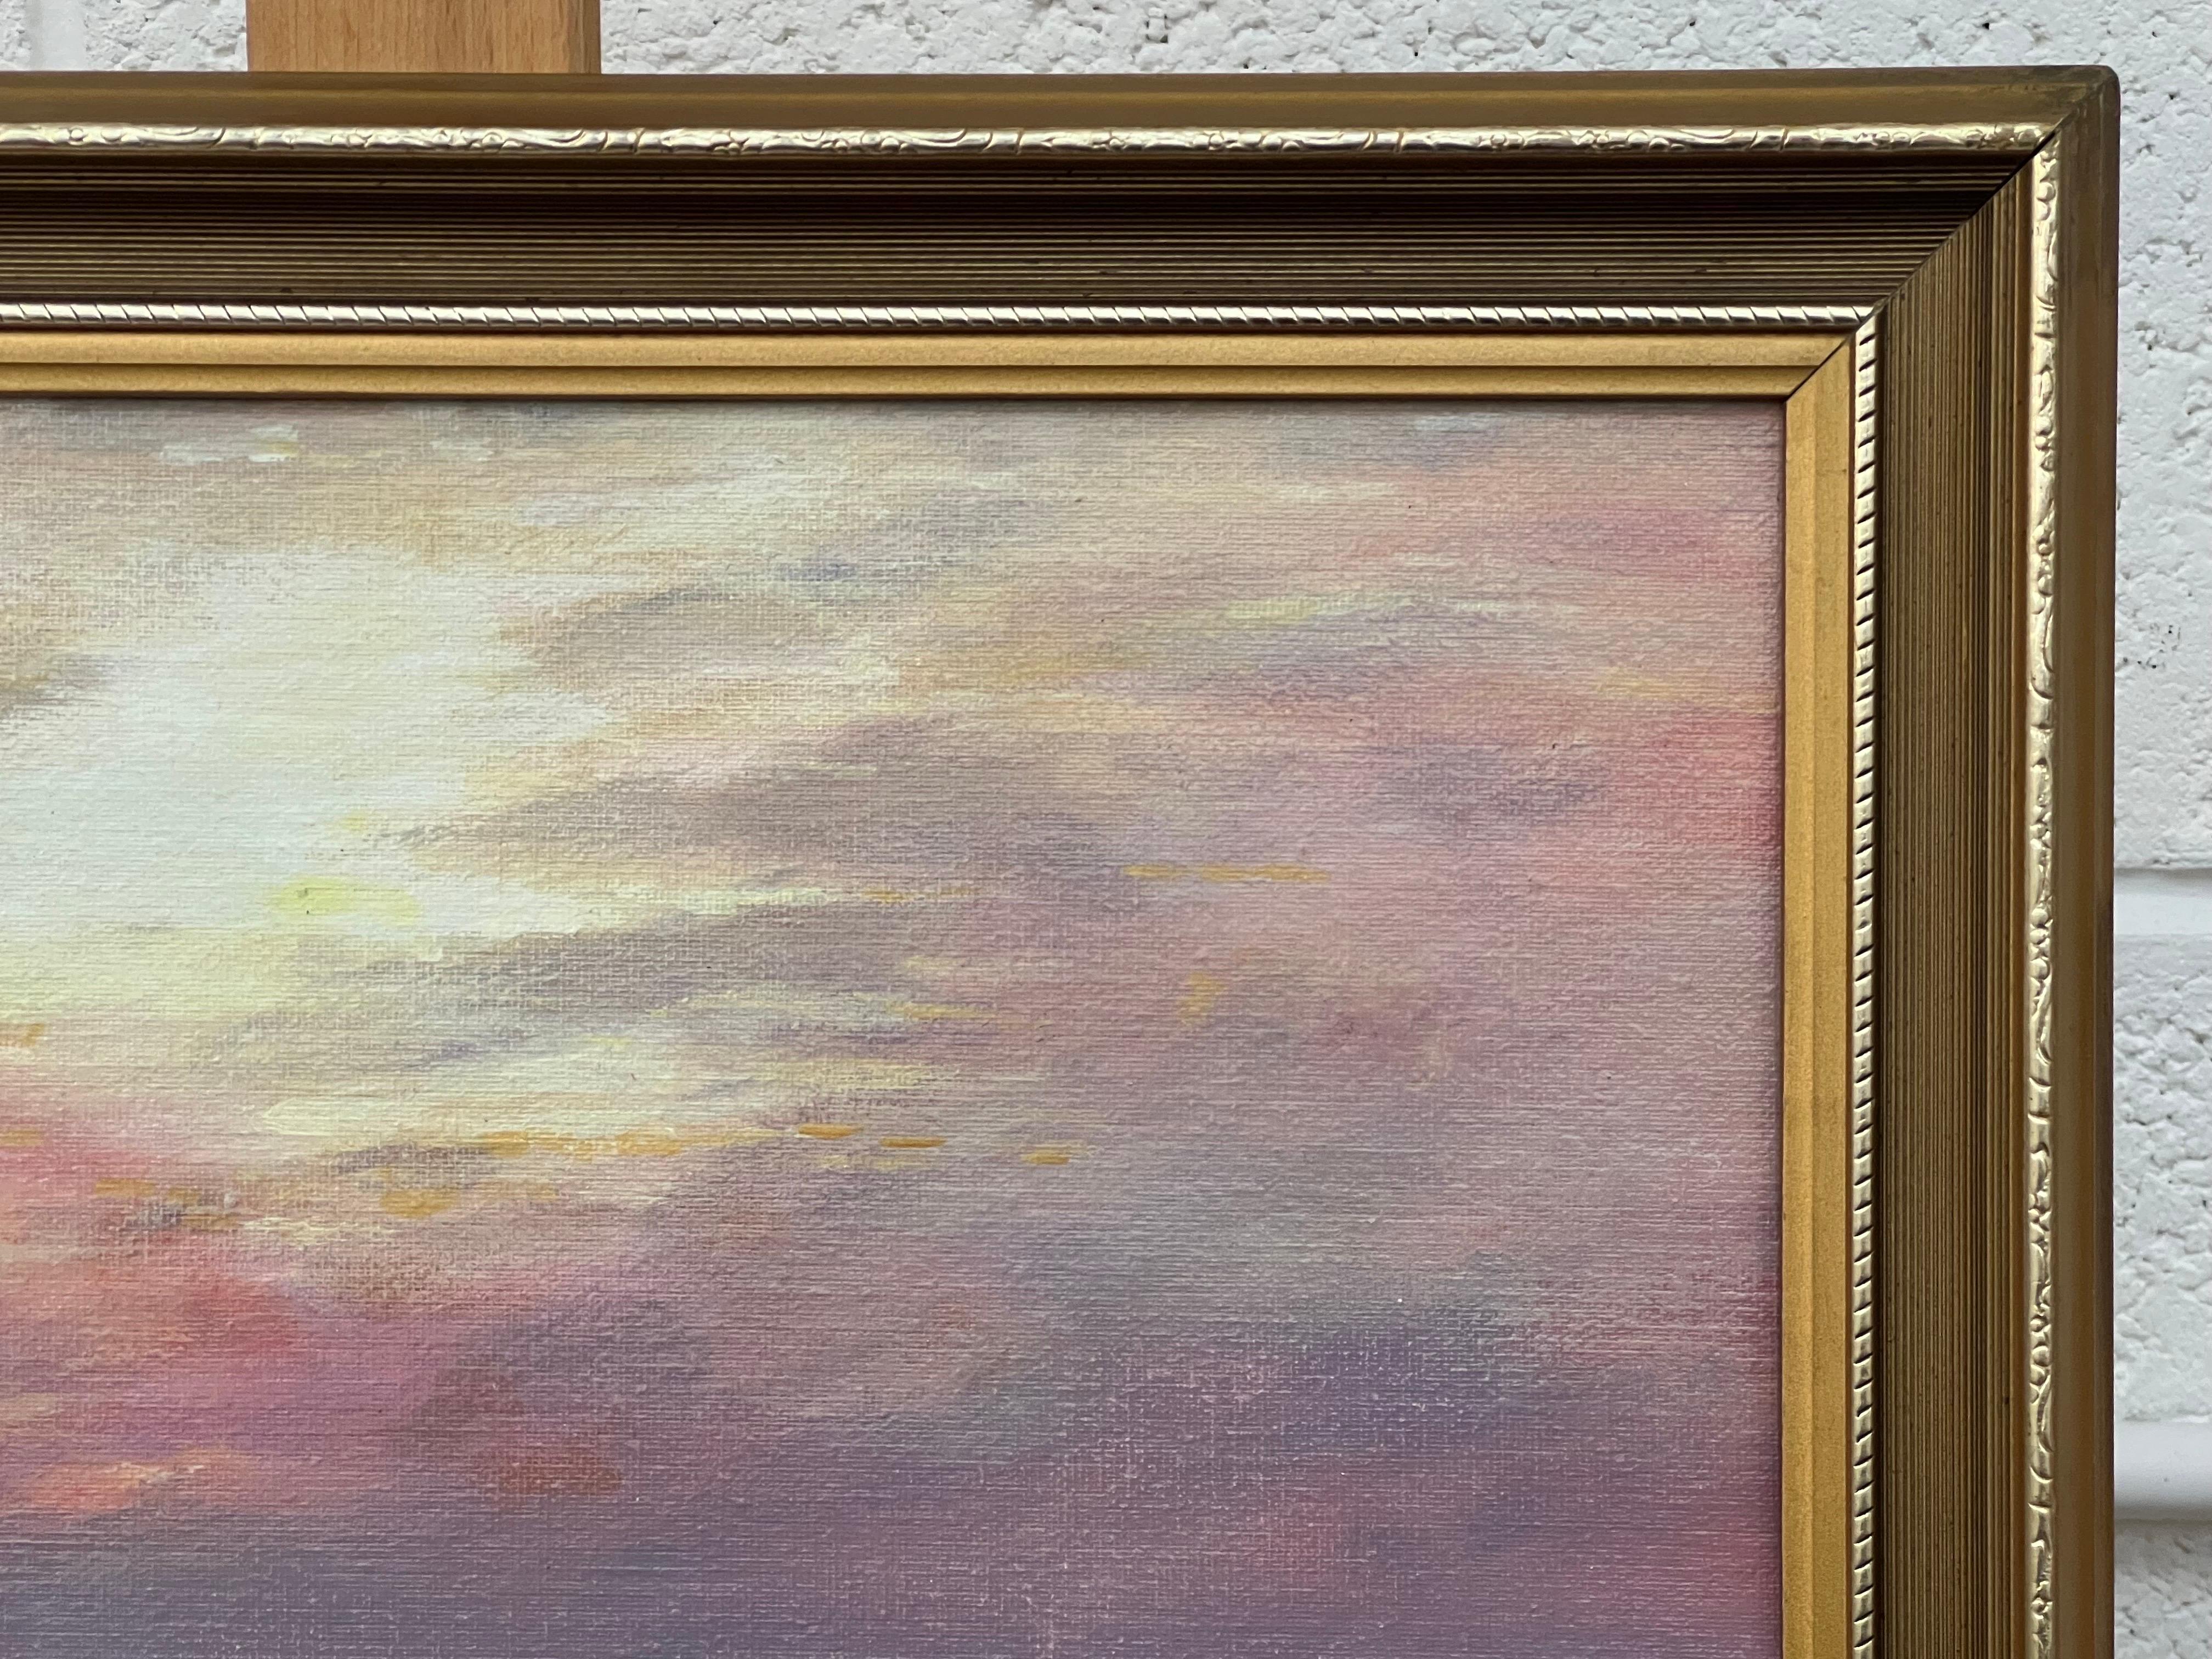 Dawn Seascape Painting with Pink Sky and Waves by 20th Century British Artist For Sale 3